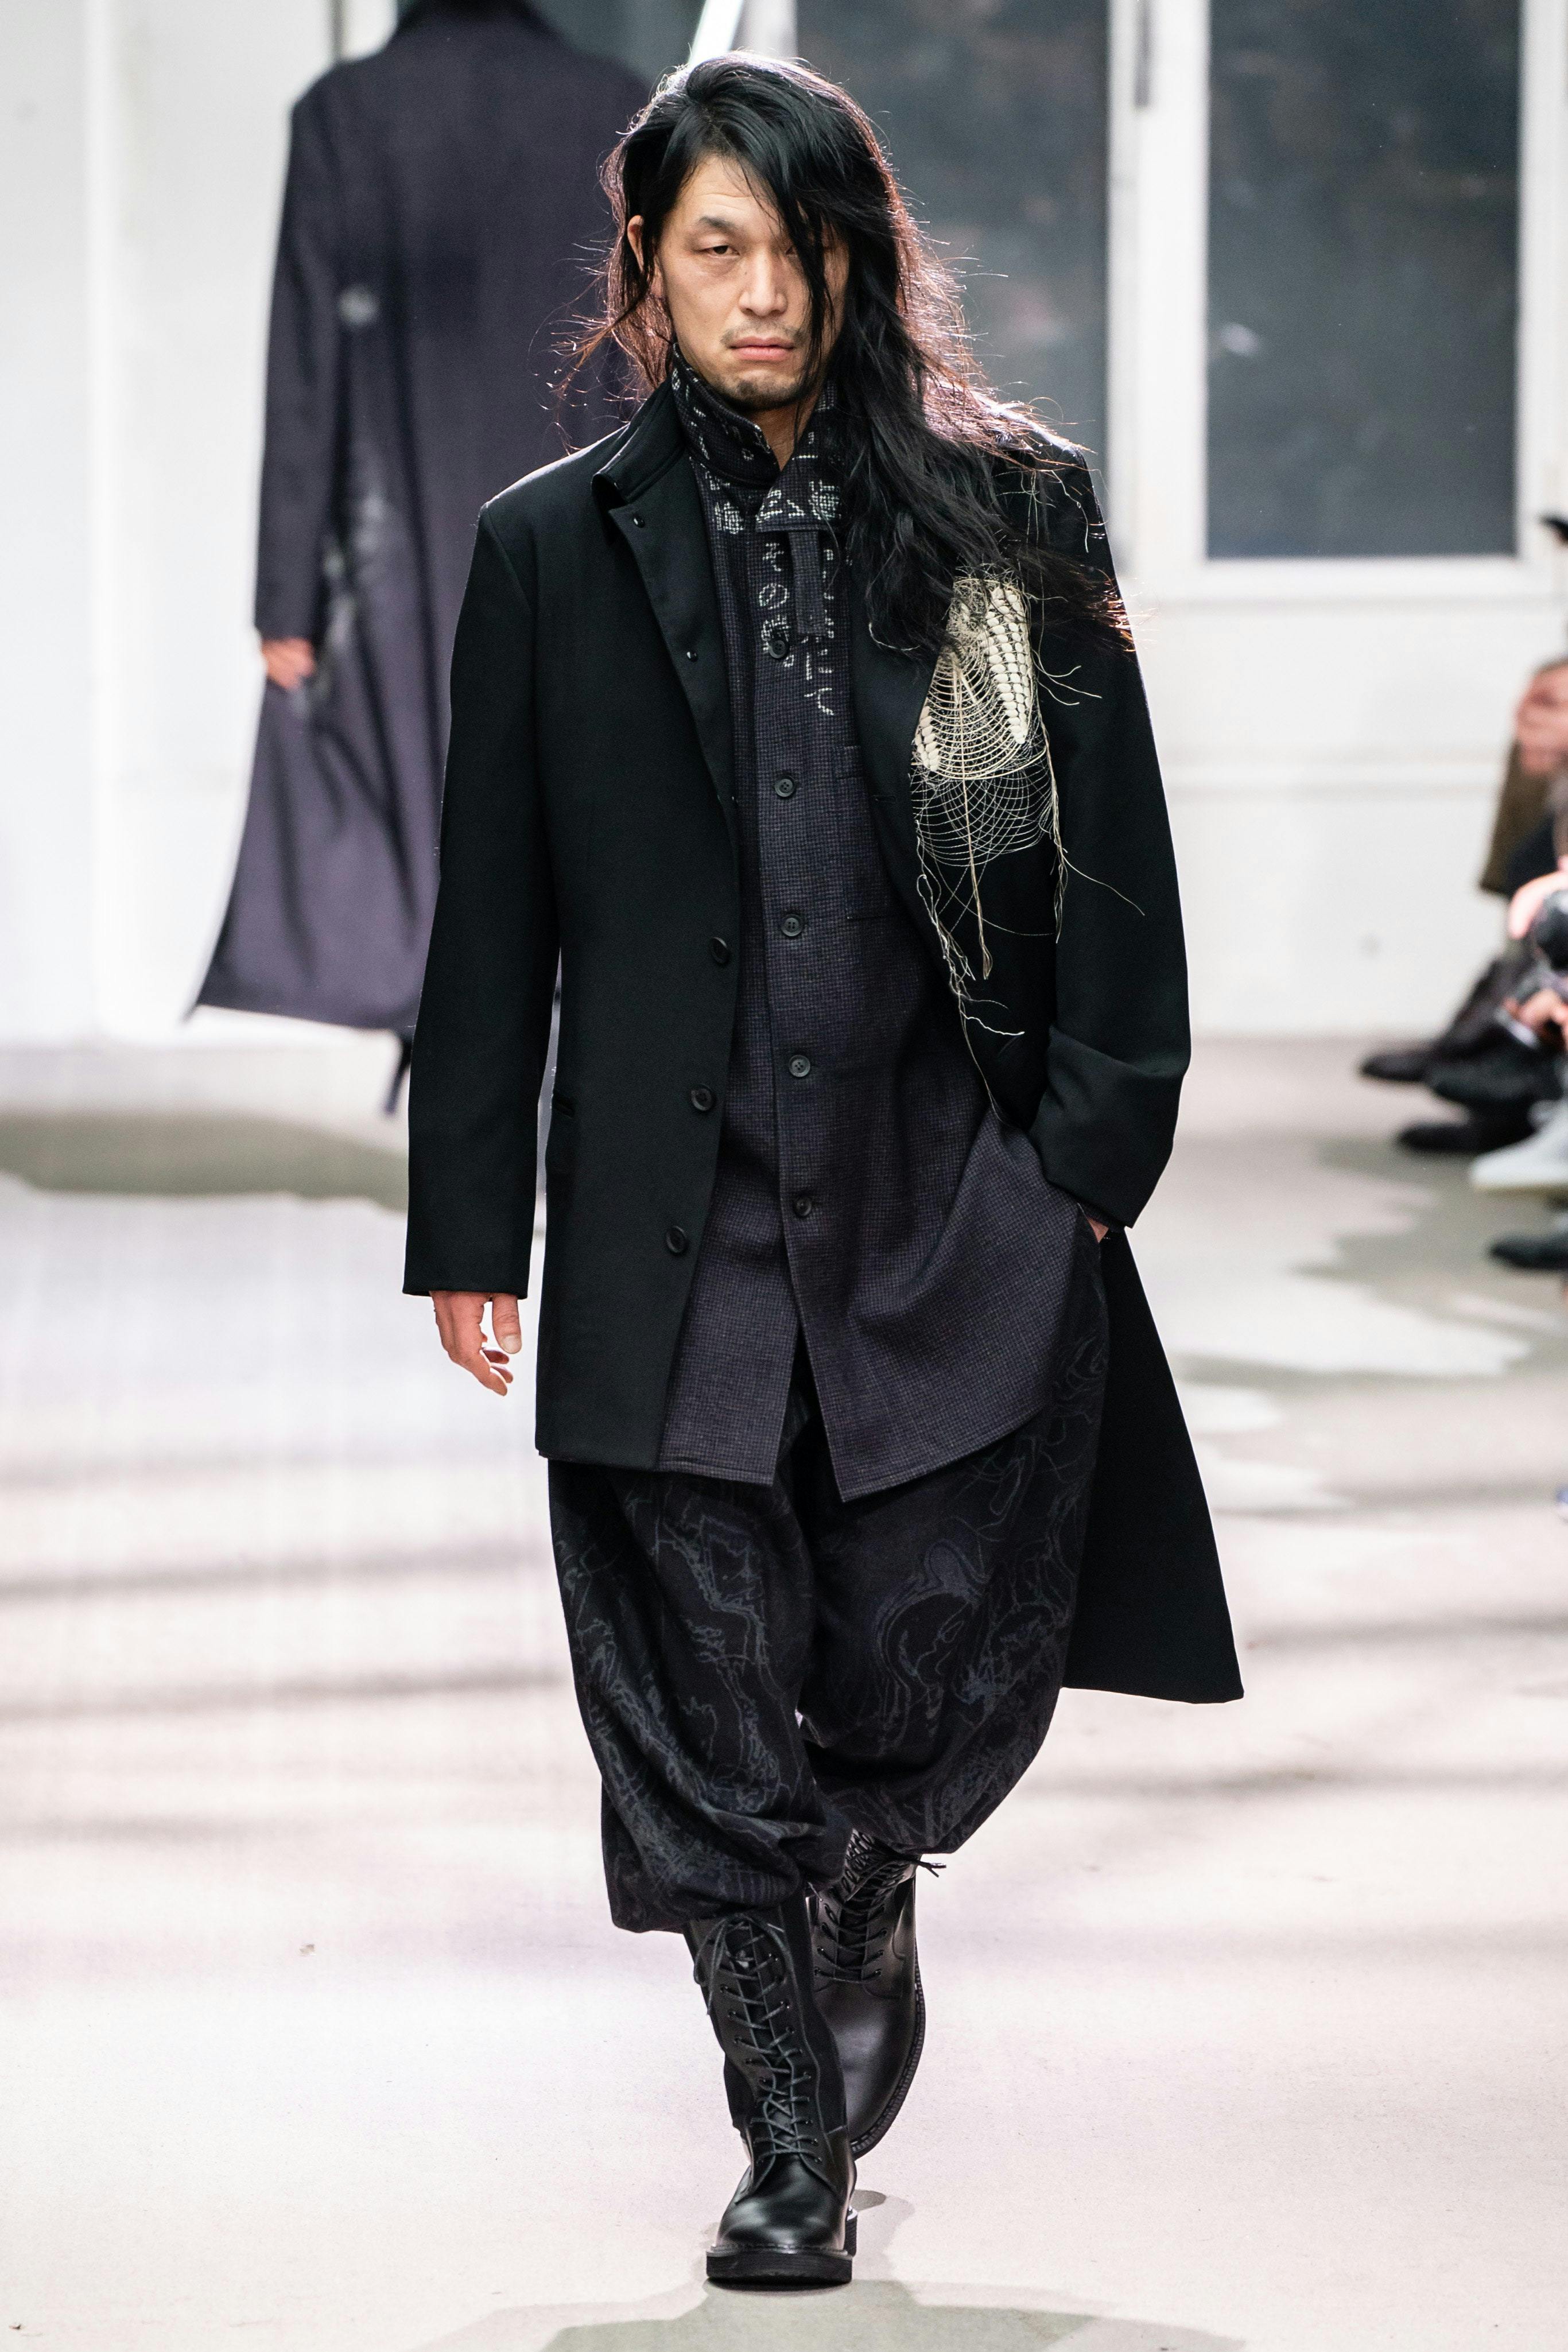 Yohji Yamamoto Embroidered Coat Print Shirt in Dark Grey Print Loose Fit Trousers High Combat Boots in Black Leather FW19